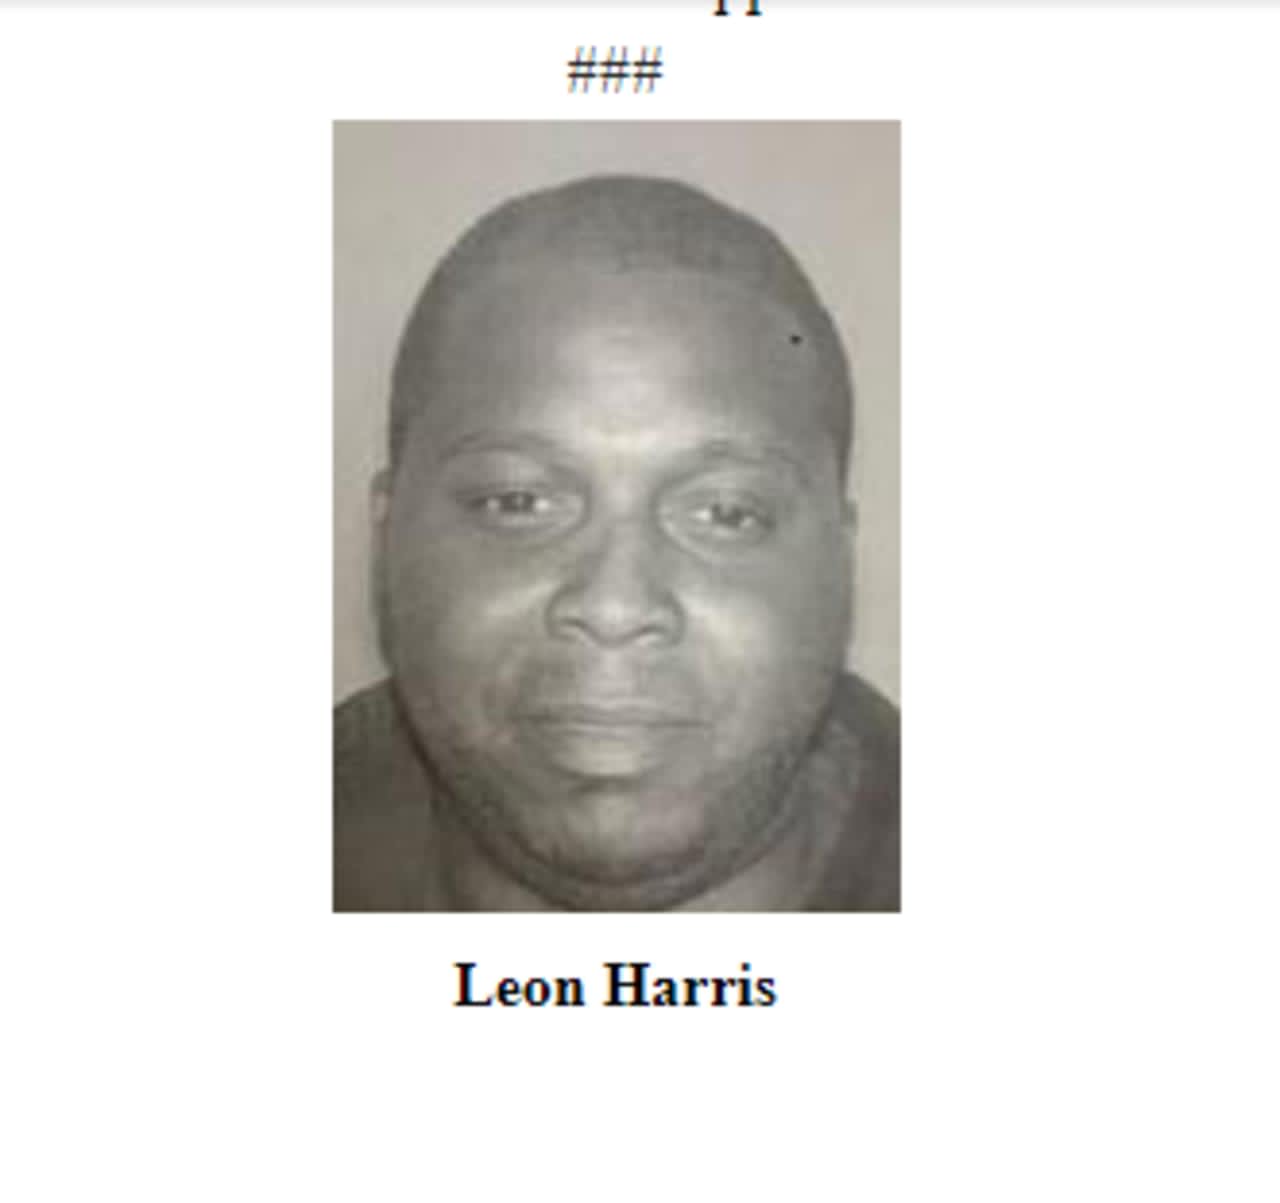 Leon Harris is wanted for assault on a Newark police officer.